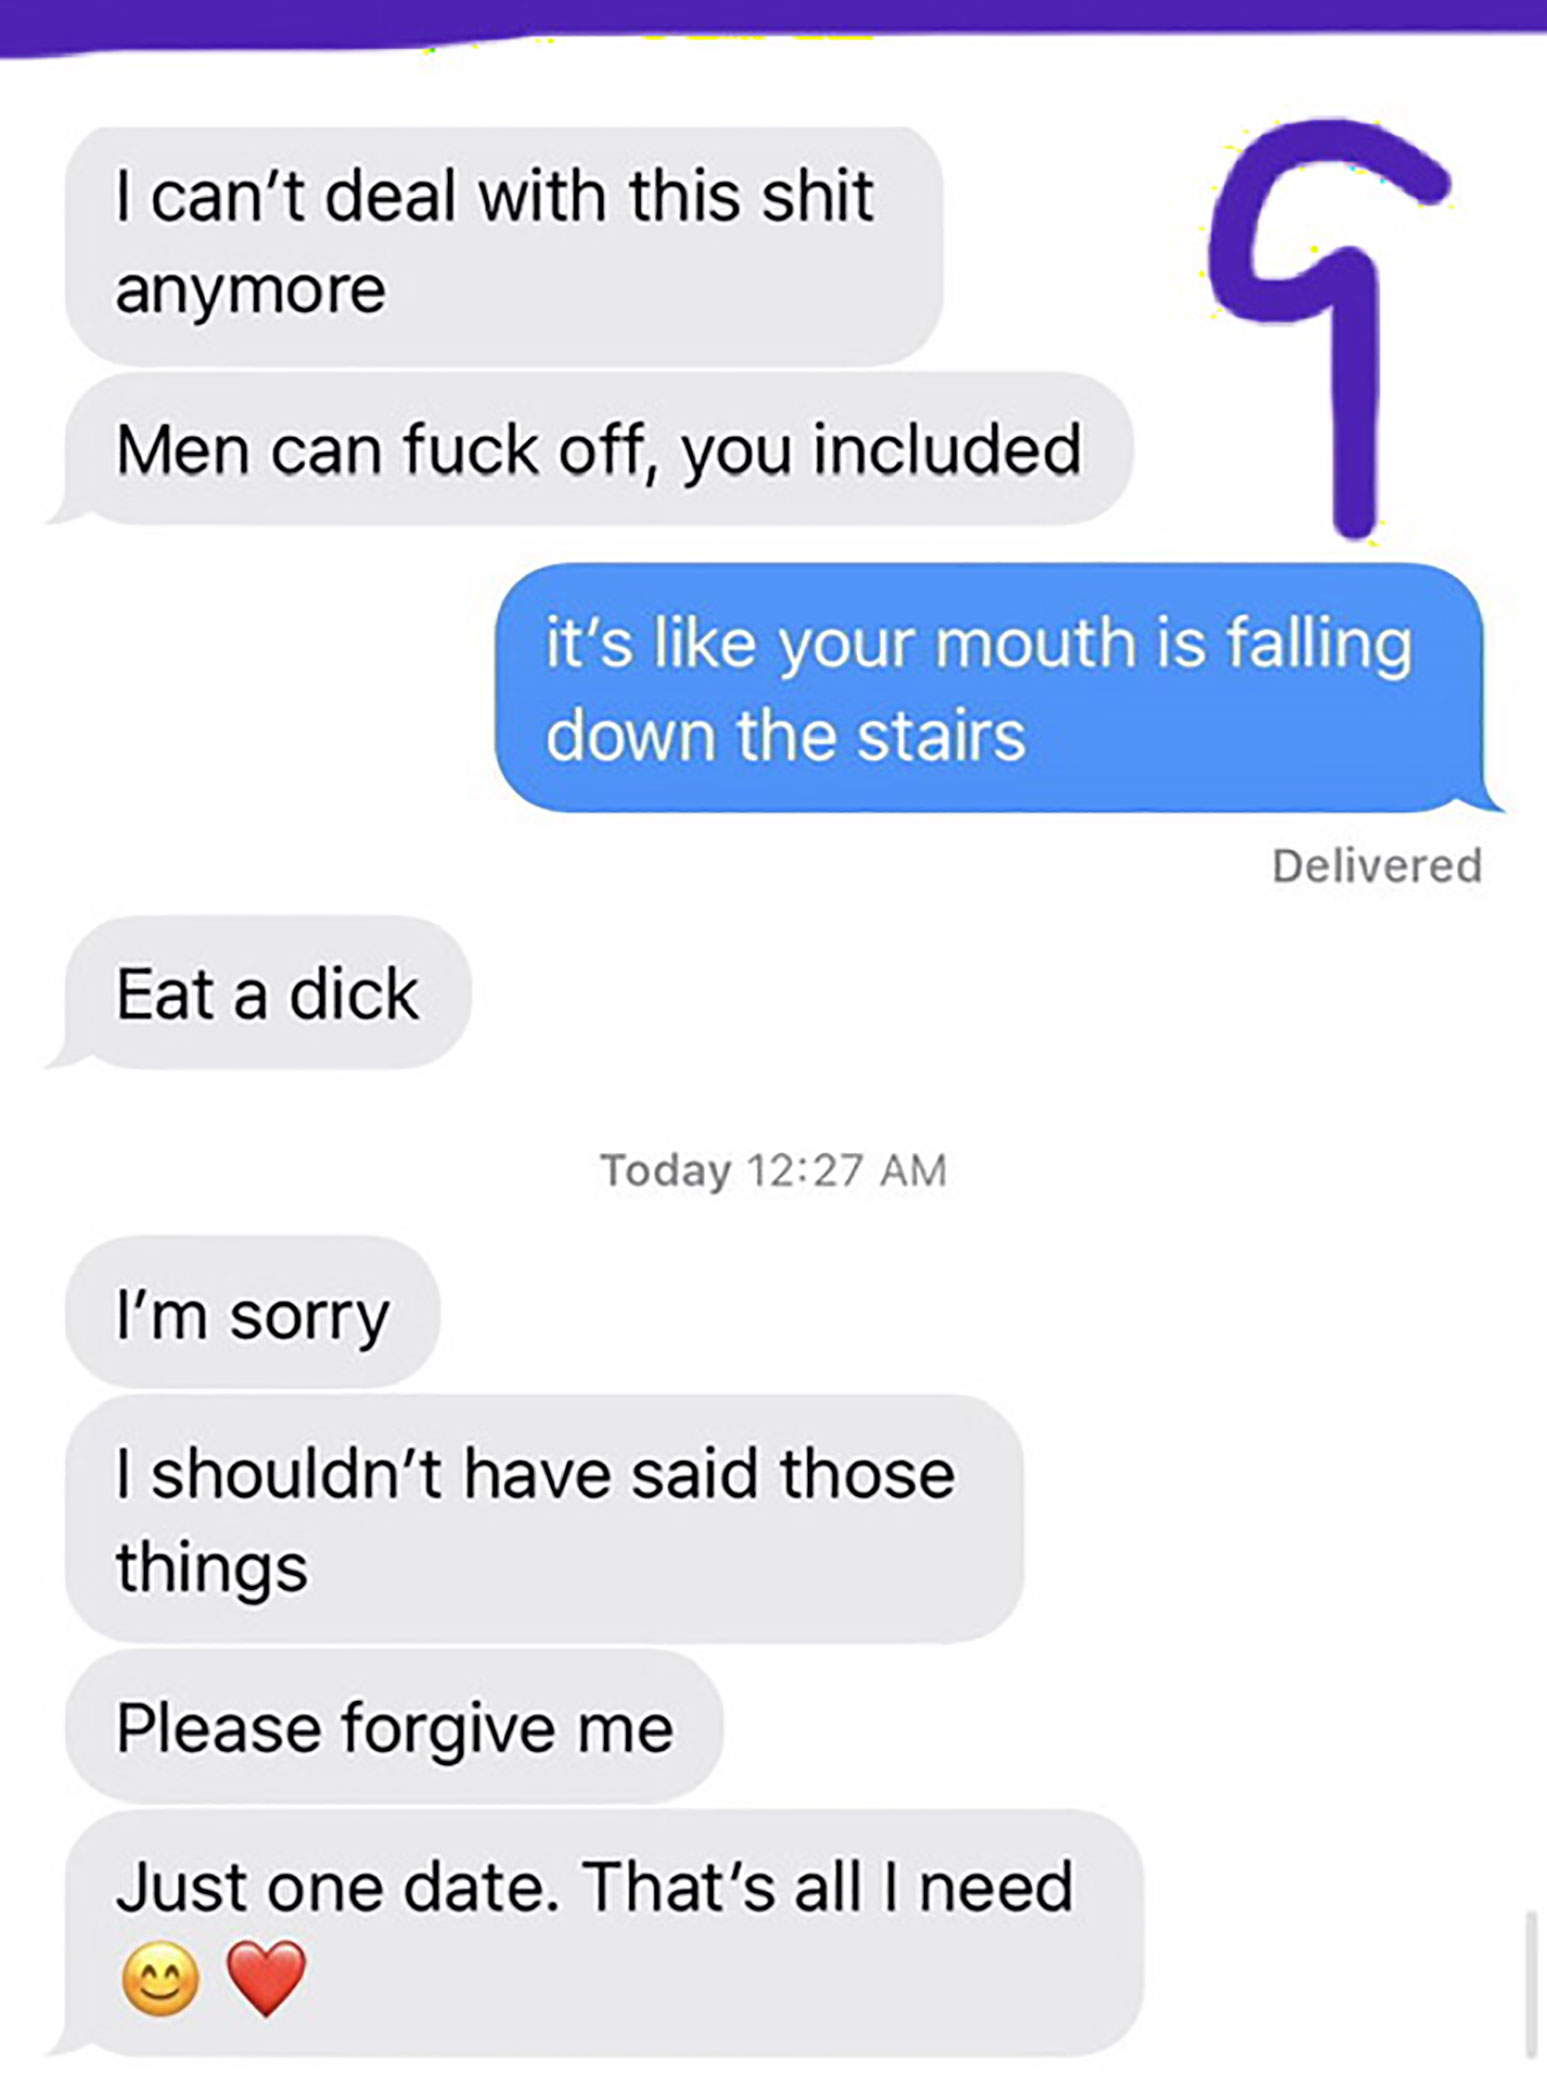 web page - I can't deal with this shit anymore Men can fuck off, you included it's your mouth is falling down the stairs Delivered Eat a dick Today I'm sorry I shouldn't have said those things Please forgive me Just one date. That's all I need